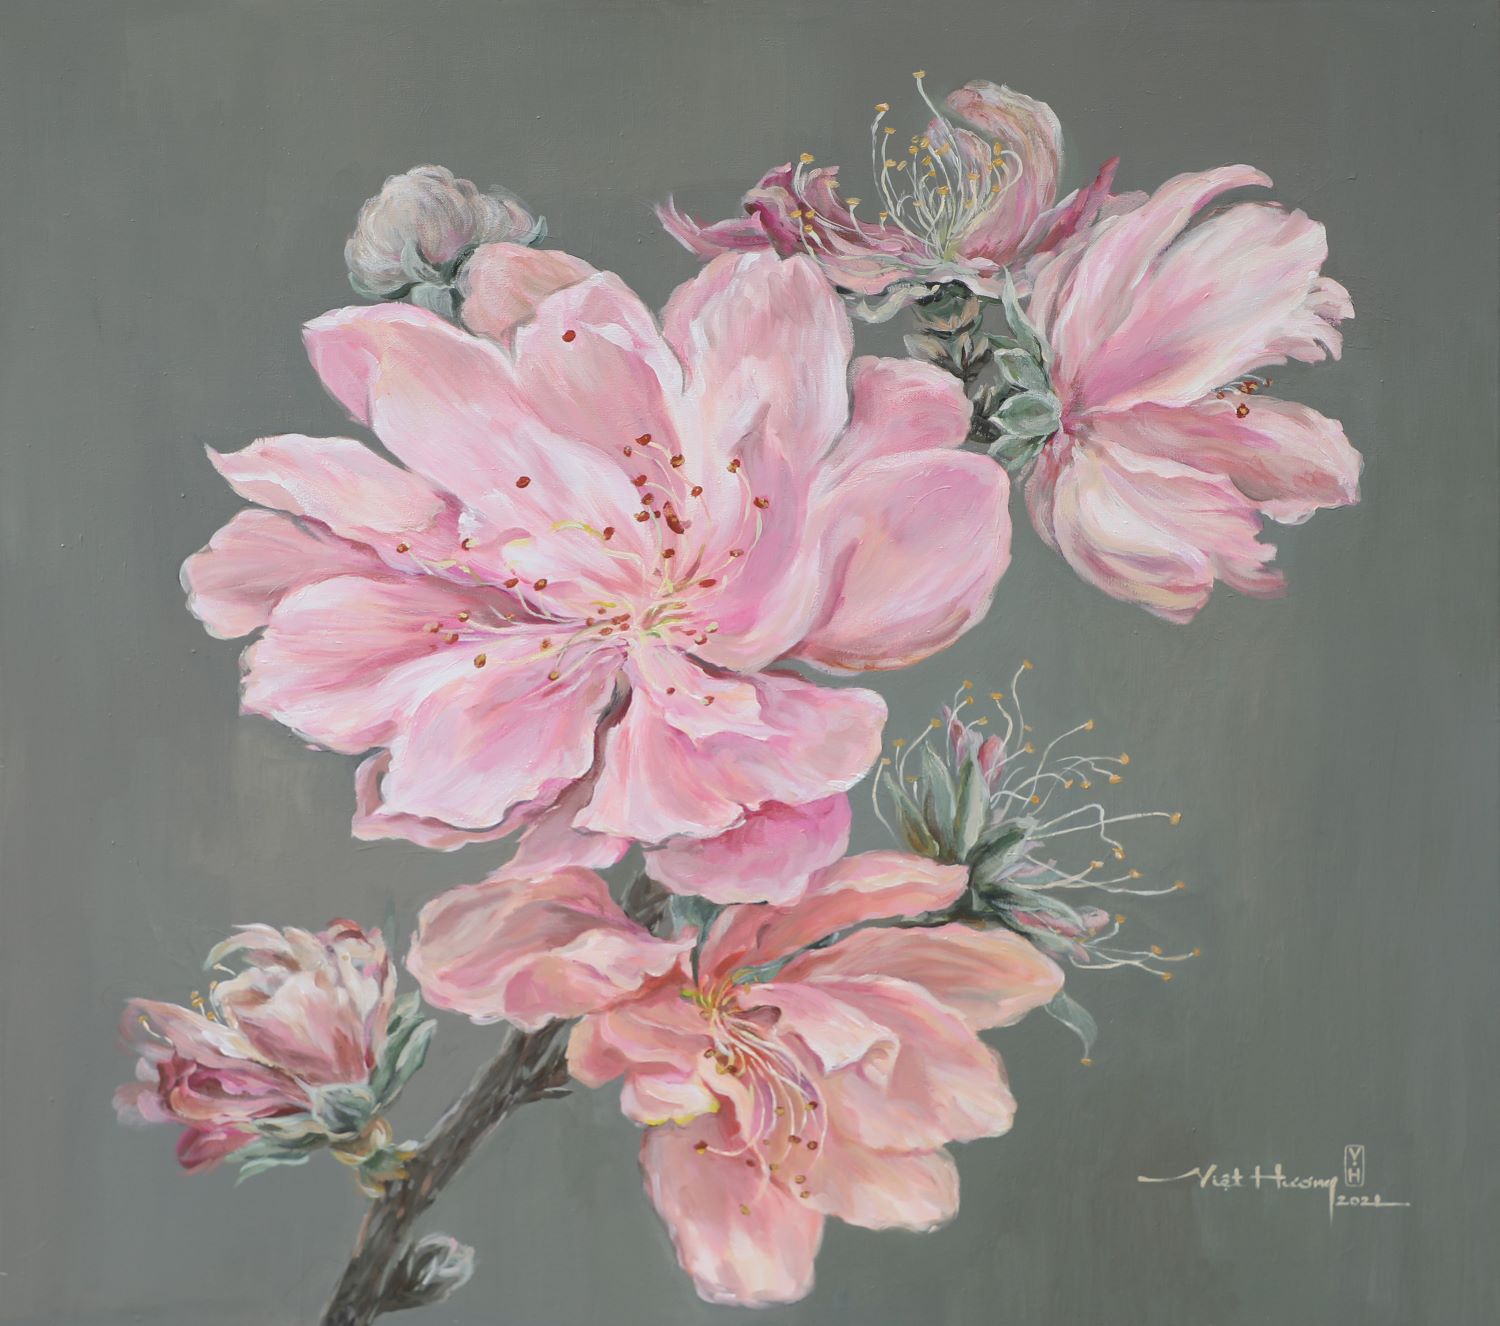 Faded Peach Blossom I - Vietnamese Oil Painting by Artist Viet Huong